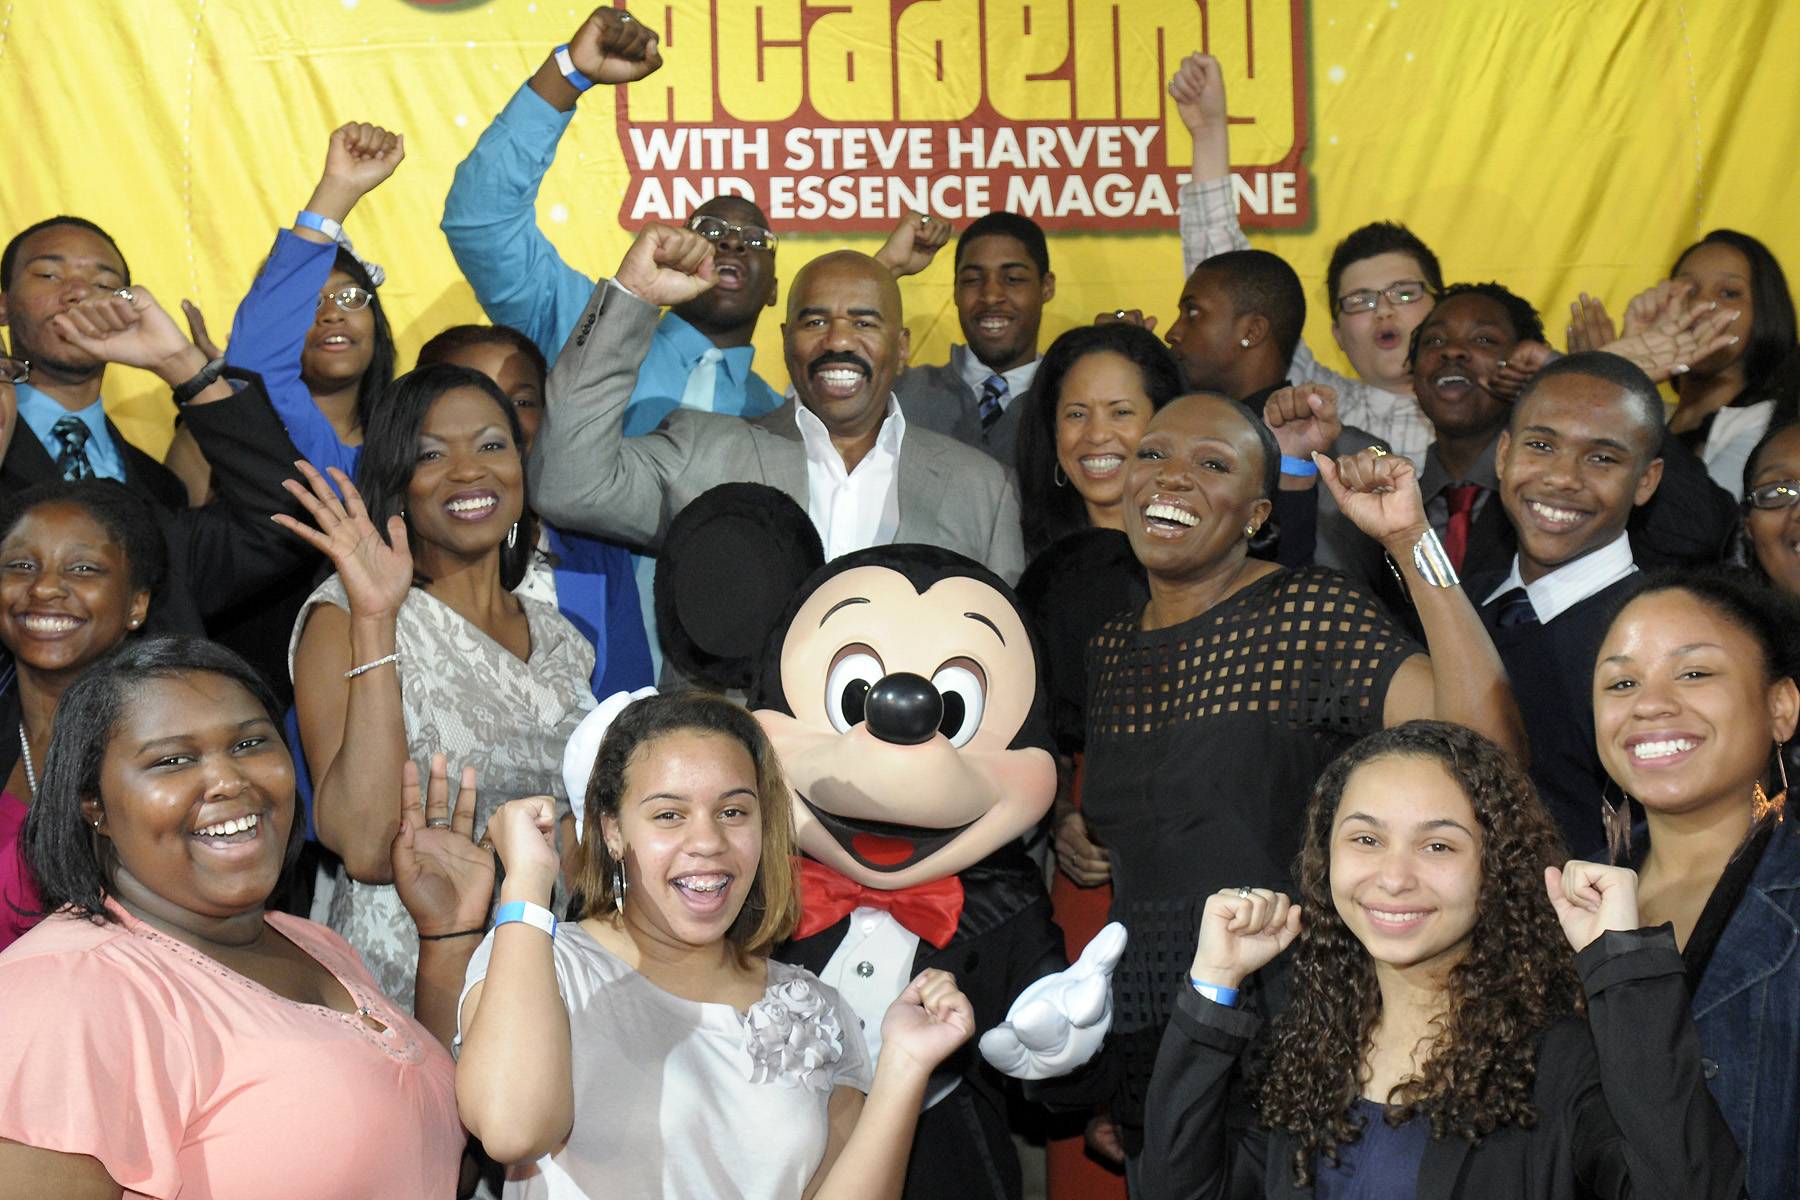 Dreaming Big - One hundred teens from around the country were invited to be part of the 5th annual&nbsp;Disney’s Dreamers Academy. Hosted by Steve Harvey and Essence magazine, the four-day conference helped high school students refine their goals and gain self-confidence while they attended innovative career workshops led by celebrity guests and top industry experts. &nbsp;BET.com&nbsp;looks back at their incredible journey.—Britt Middleton&nbsp;(Photo: Phelan Ebenhack).&nbsp;